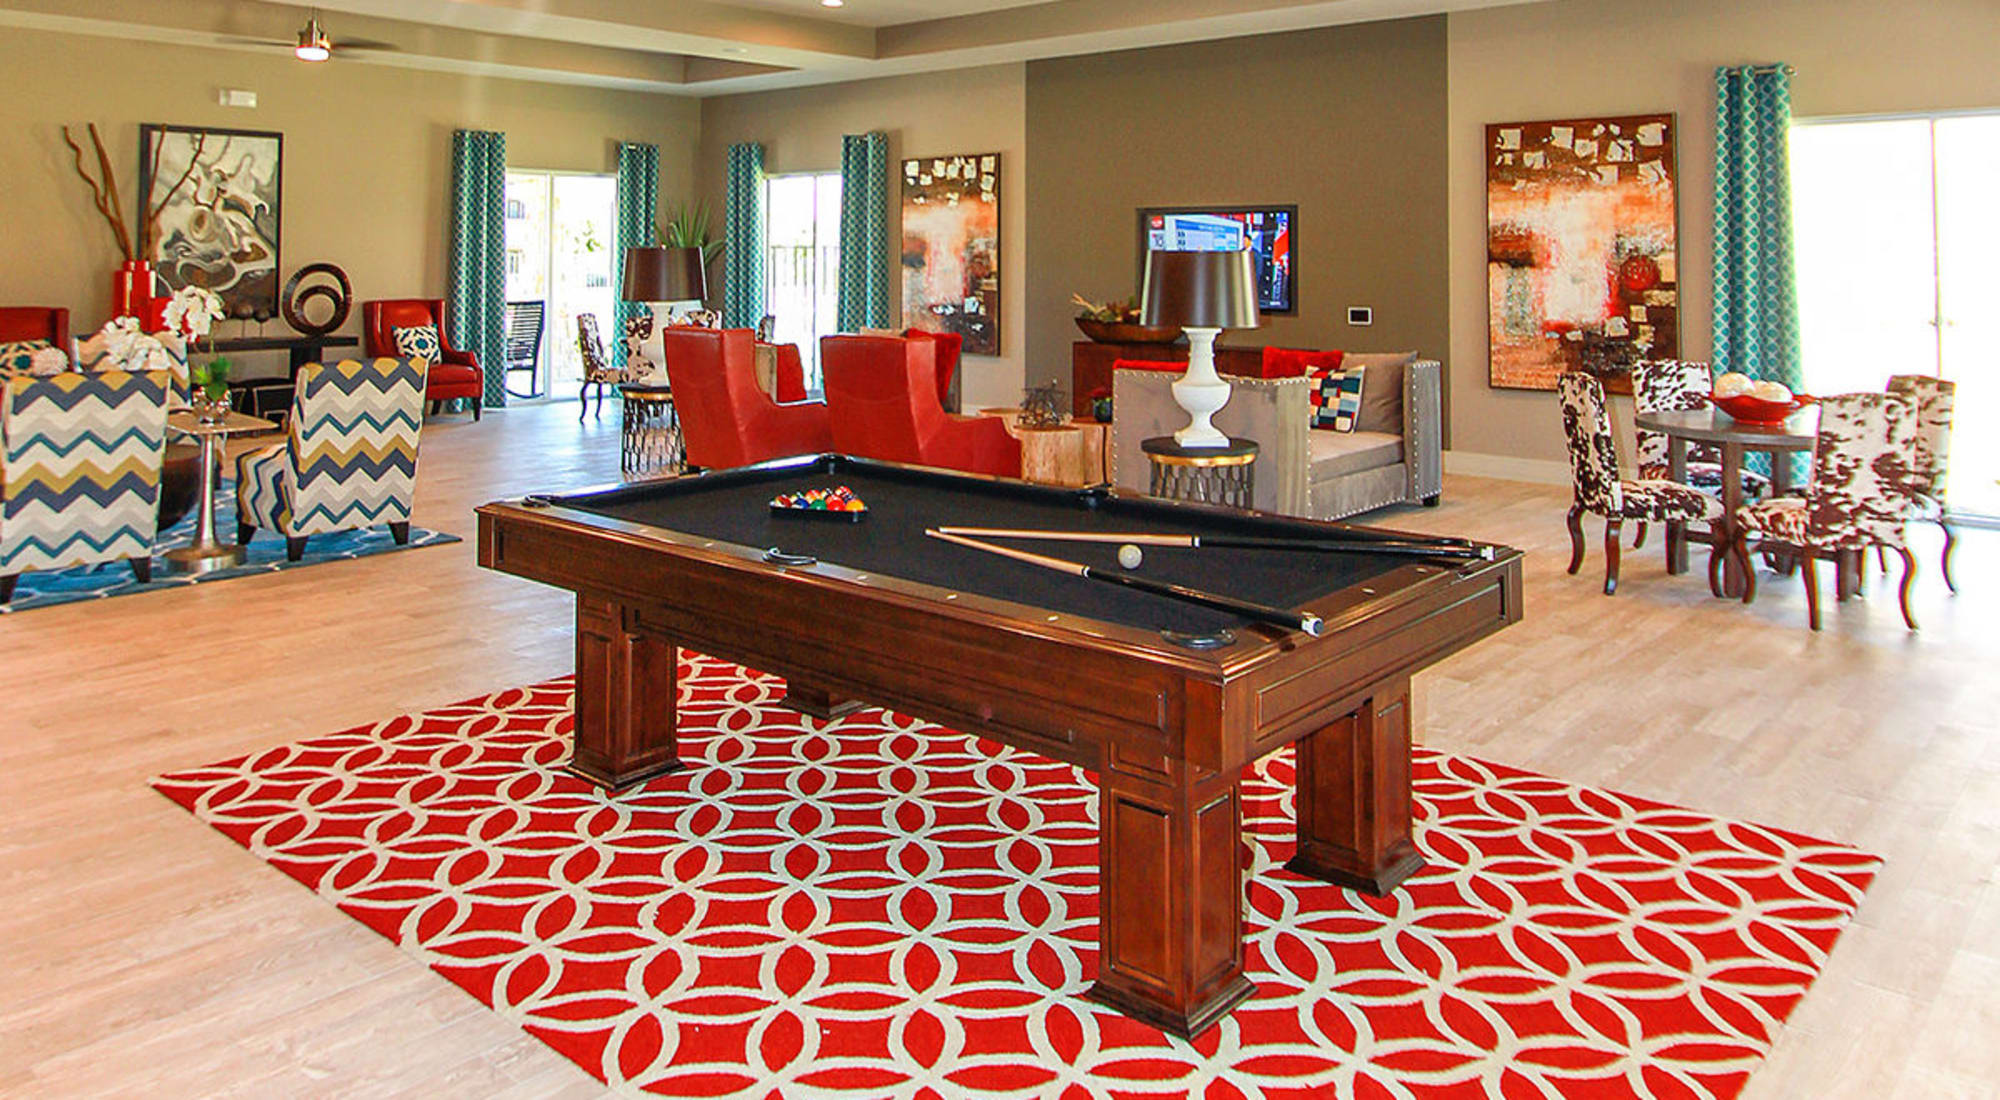 Game room with pool table at Estates of Richardson